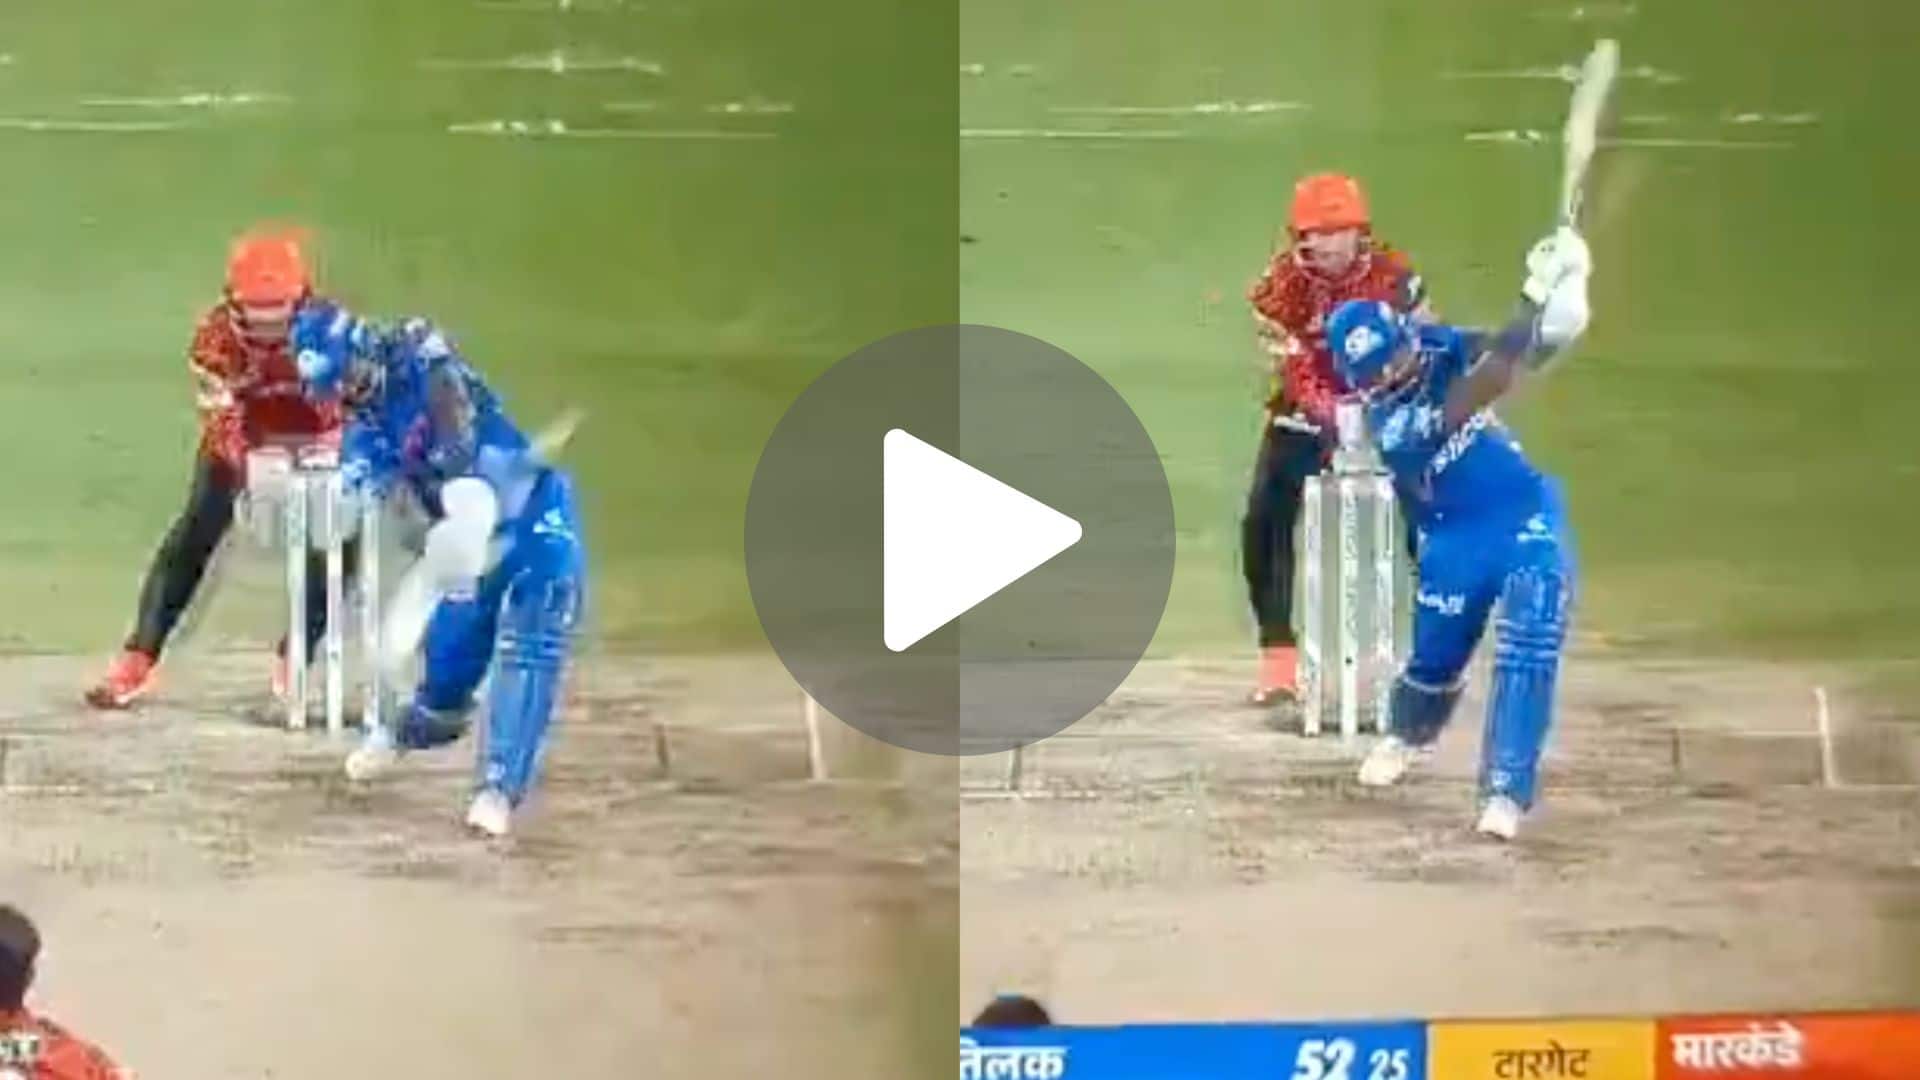 [Watch] Hardik Pandya Completes 100 Sixes For MI With A Monstrous 'No Look' Hit